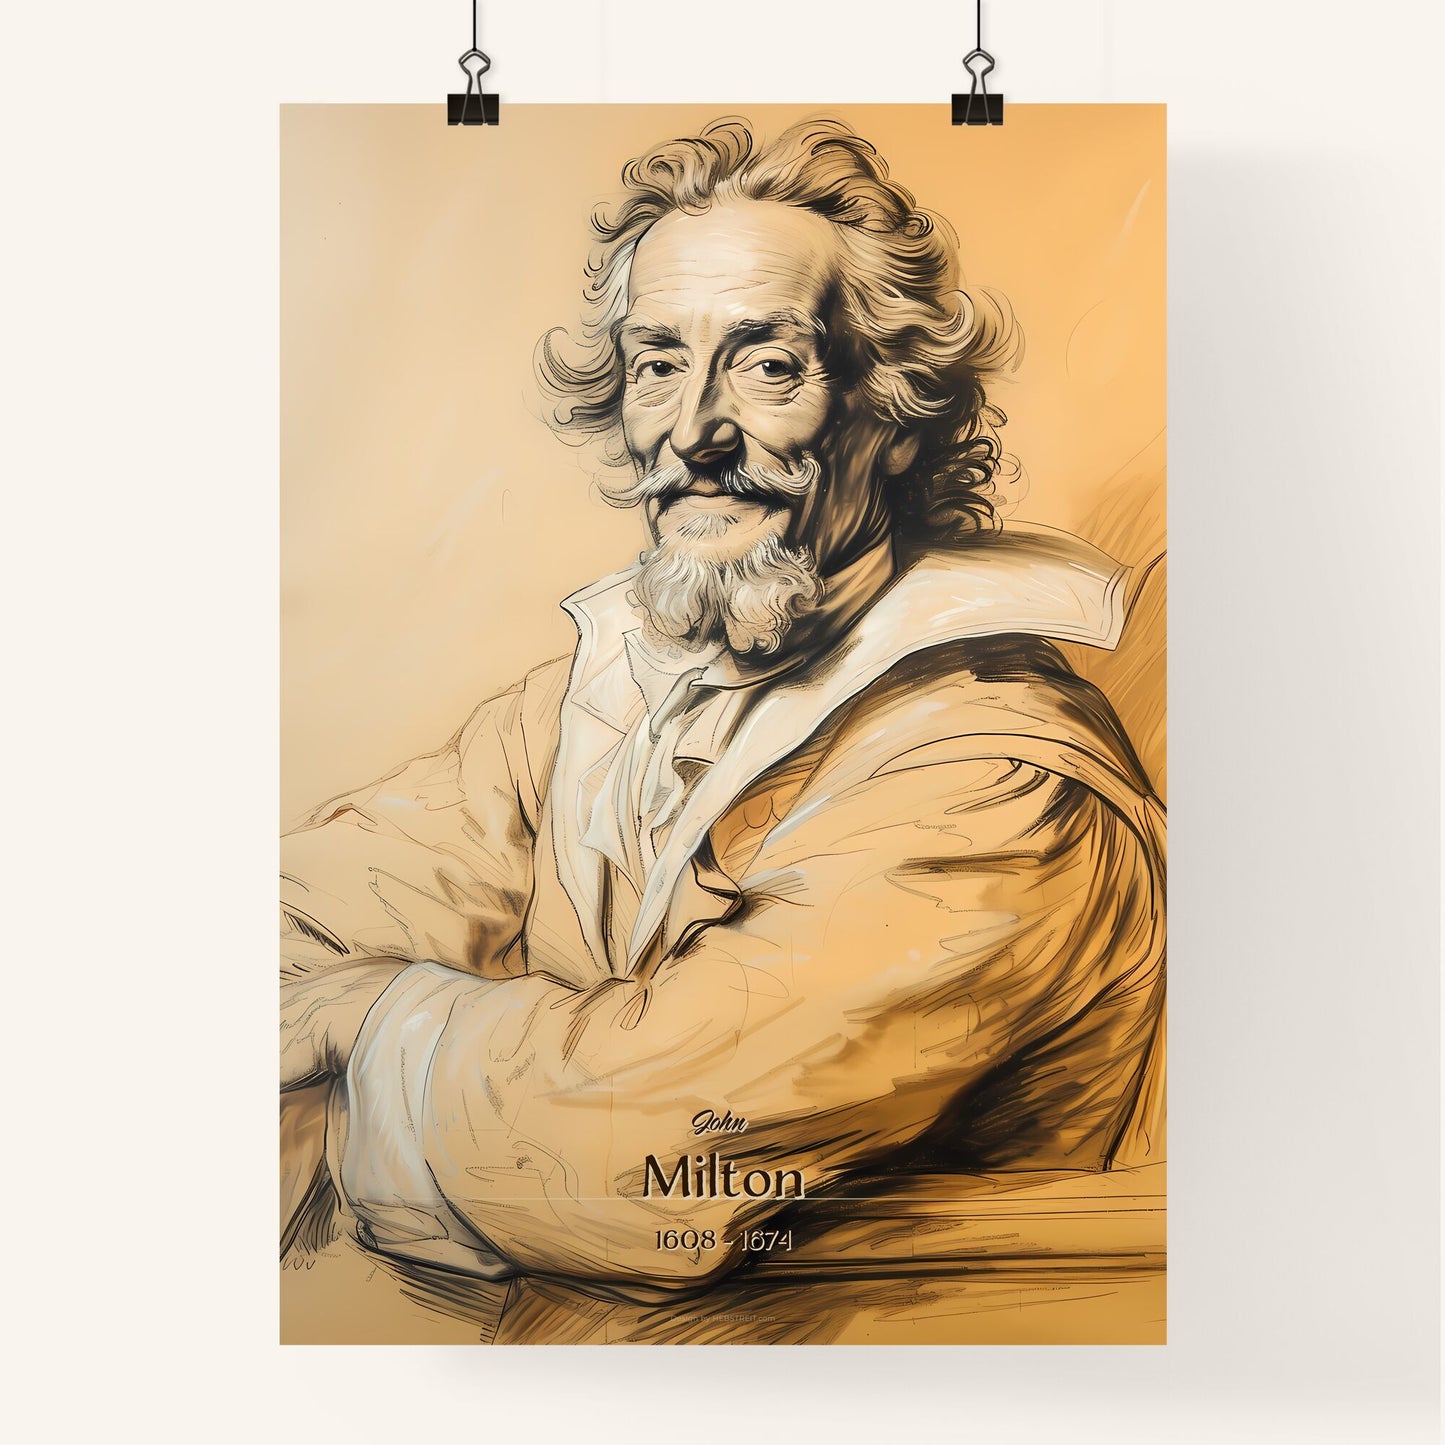 John, Milton, 1608 - 1674, A Poster of a drawing of a man with his arms crossed Default Title